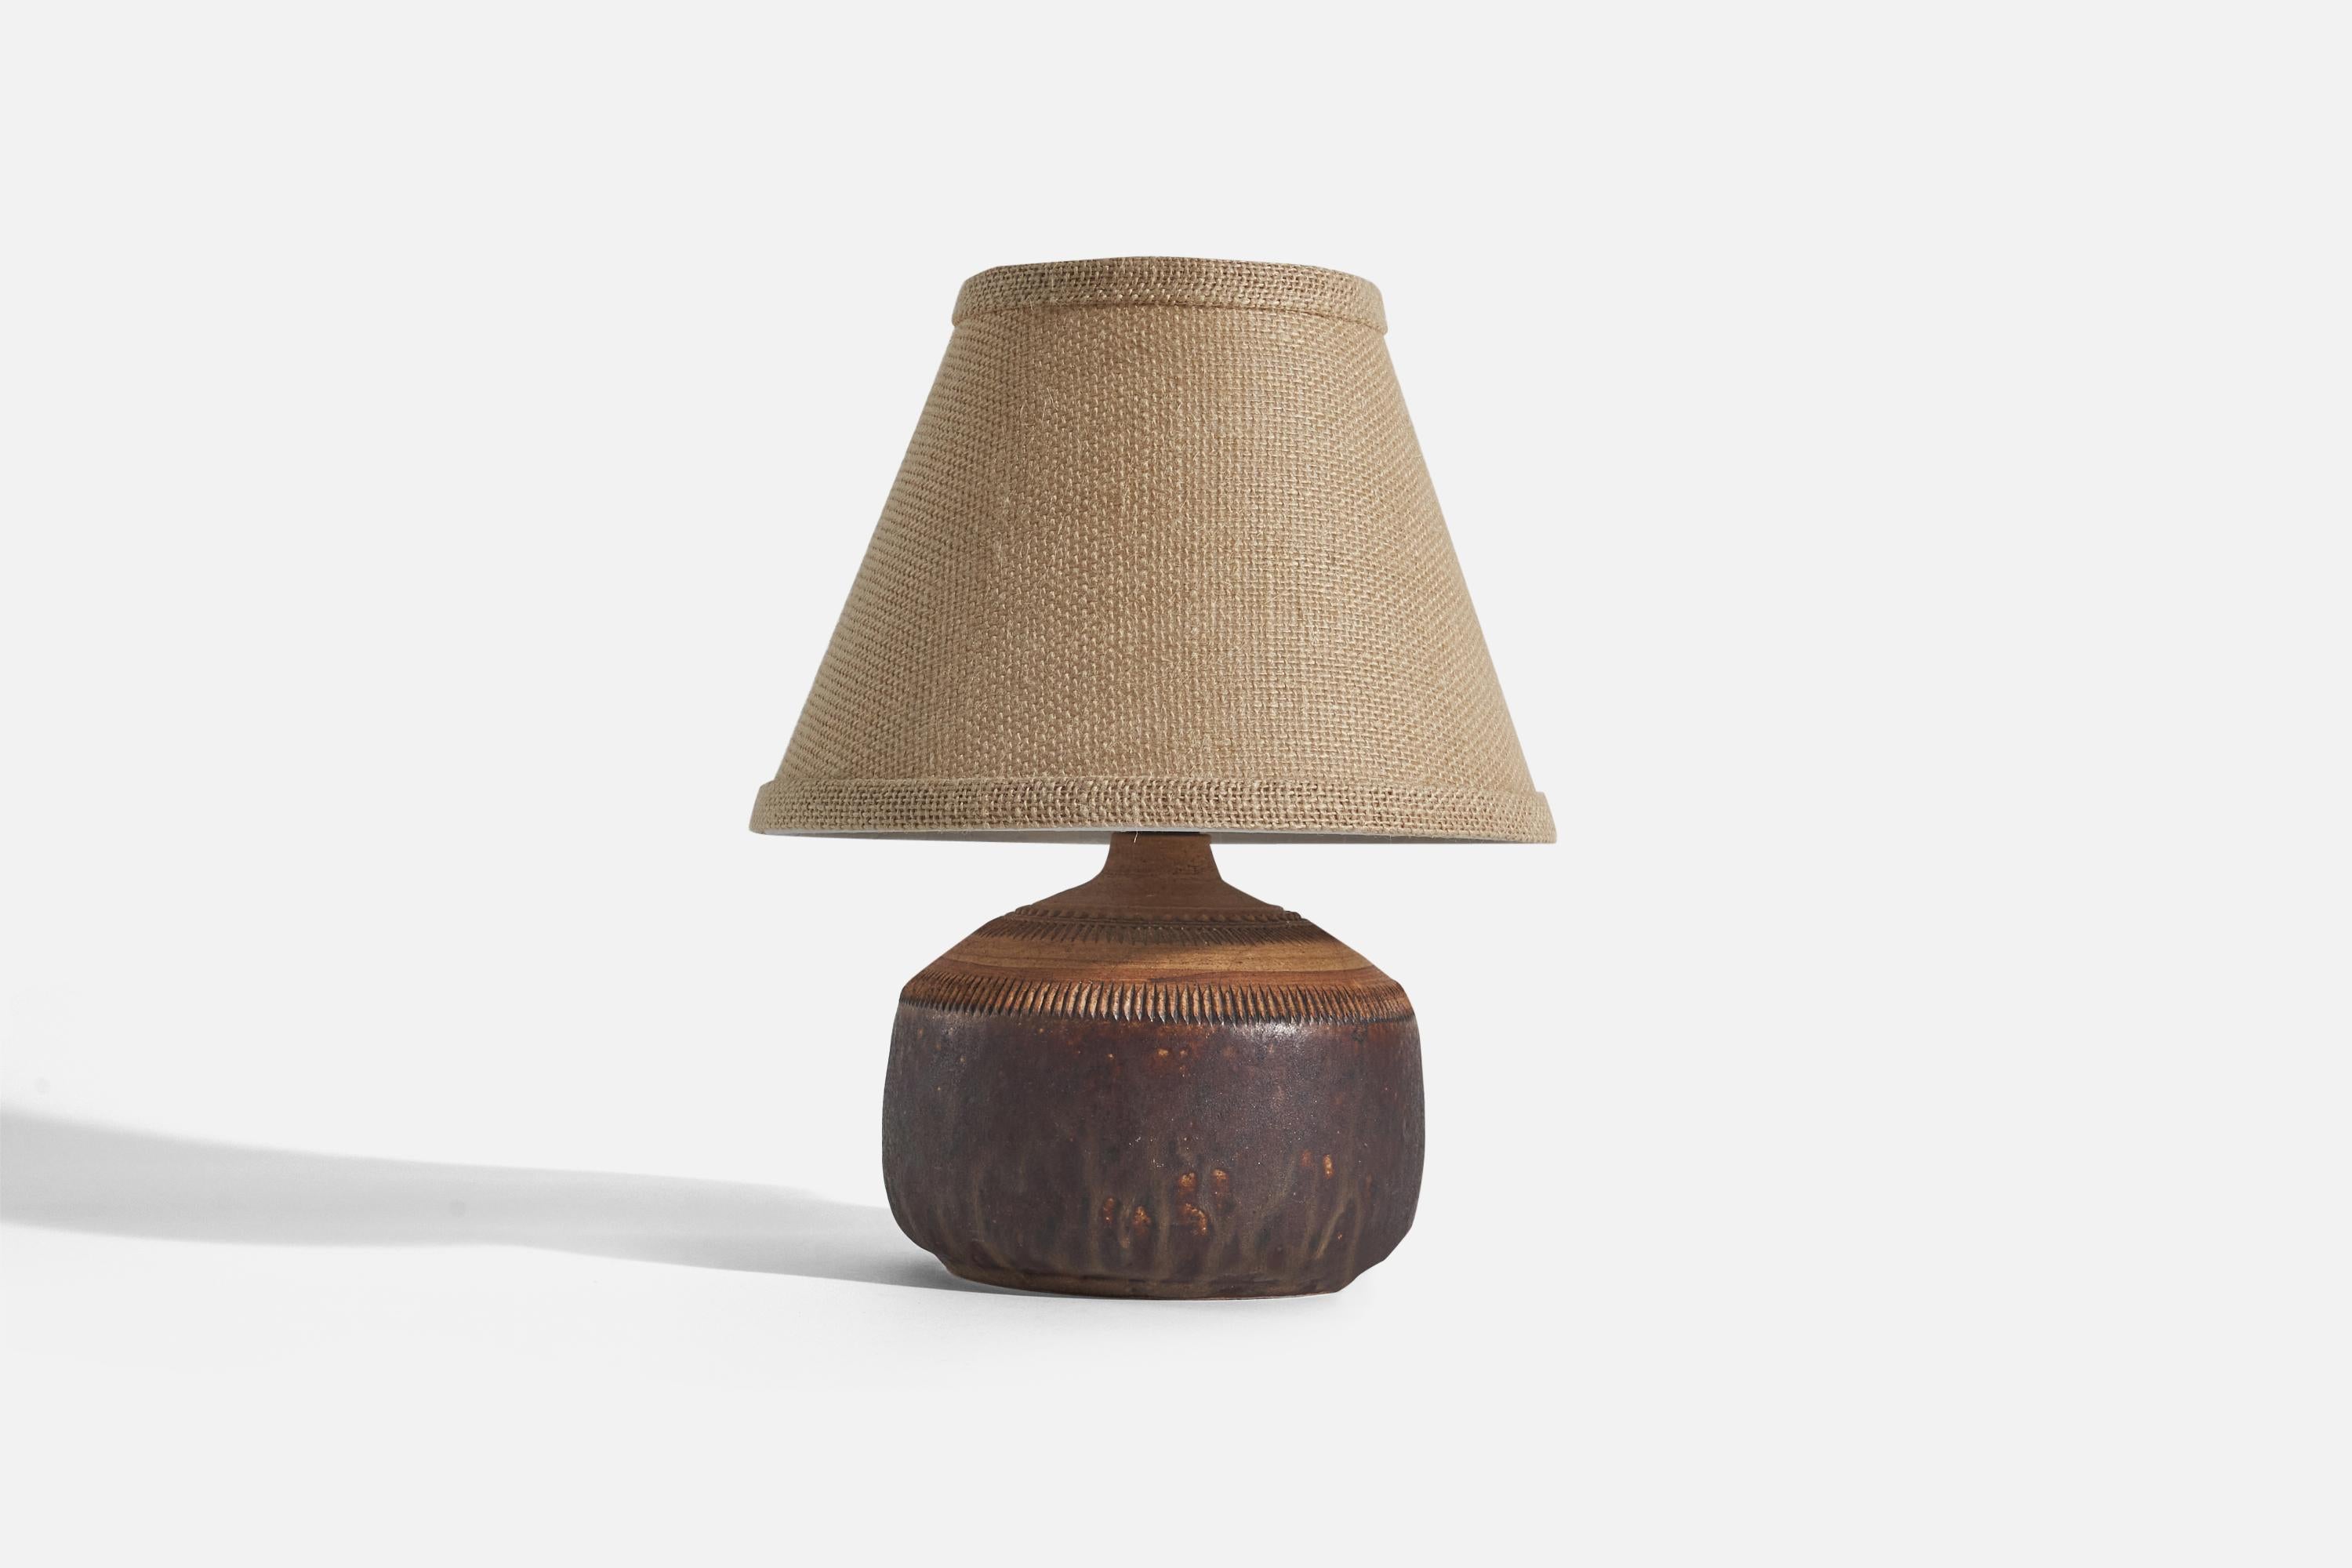 A brown, glazed stoneware table lamp designed and produced by Klase Höganäs, Sweden, 1960s. 

Sold with fabric lampshade. 
Dimensions of Lamp (inches) : 6.75 x 5.75 x 5.75 (Height x Width x Depth)
Dimensions of Shade (inches) : 4.25 x 8.25 x